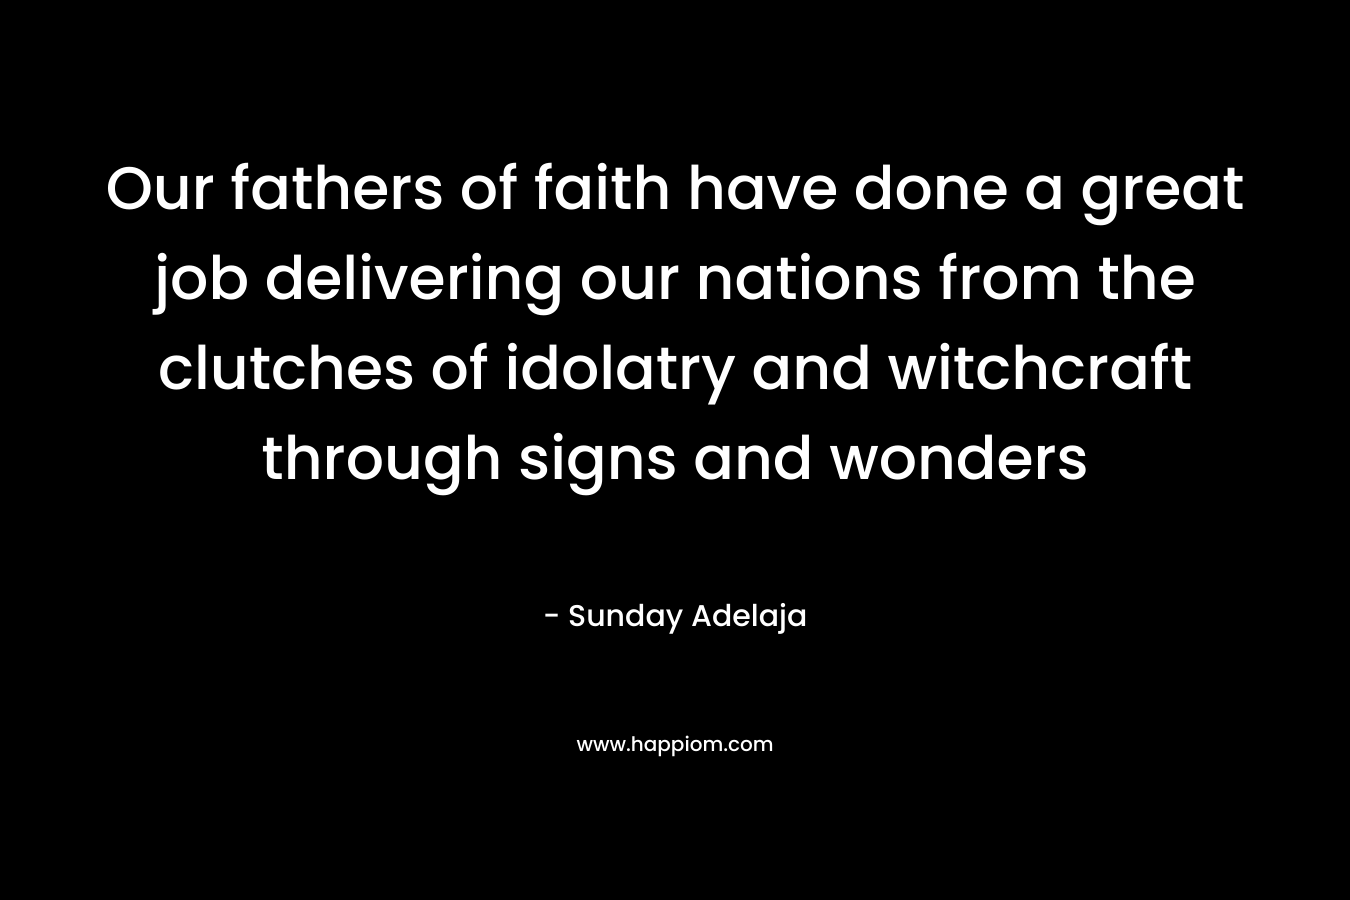 Our fathers of faith have done a great job delivering our nations from the clutches of idolatry and witchcraft through signs and wonders – Sunday Adelaja